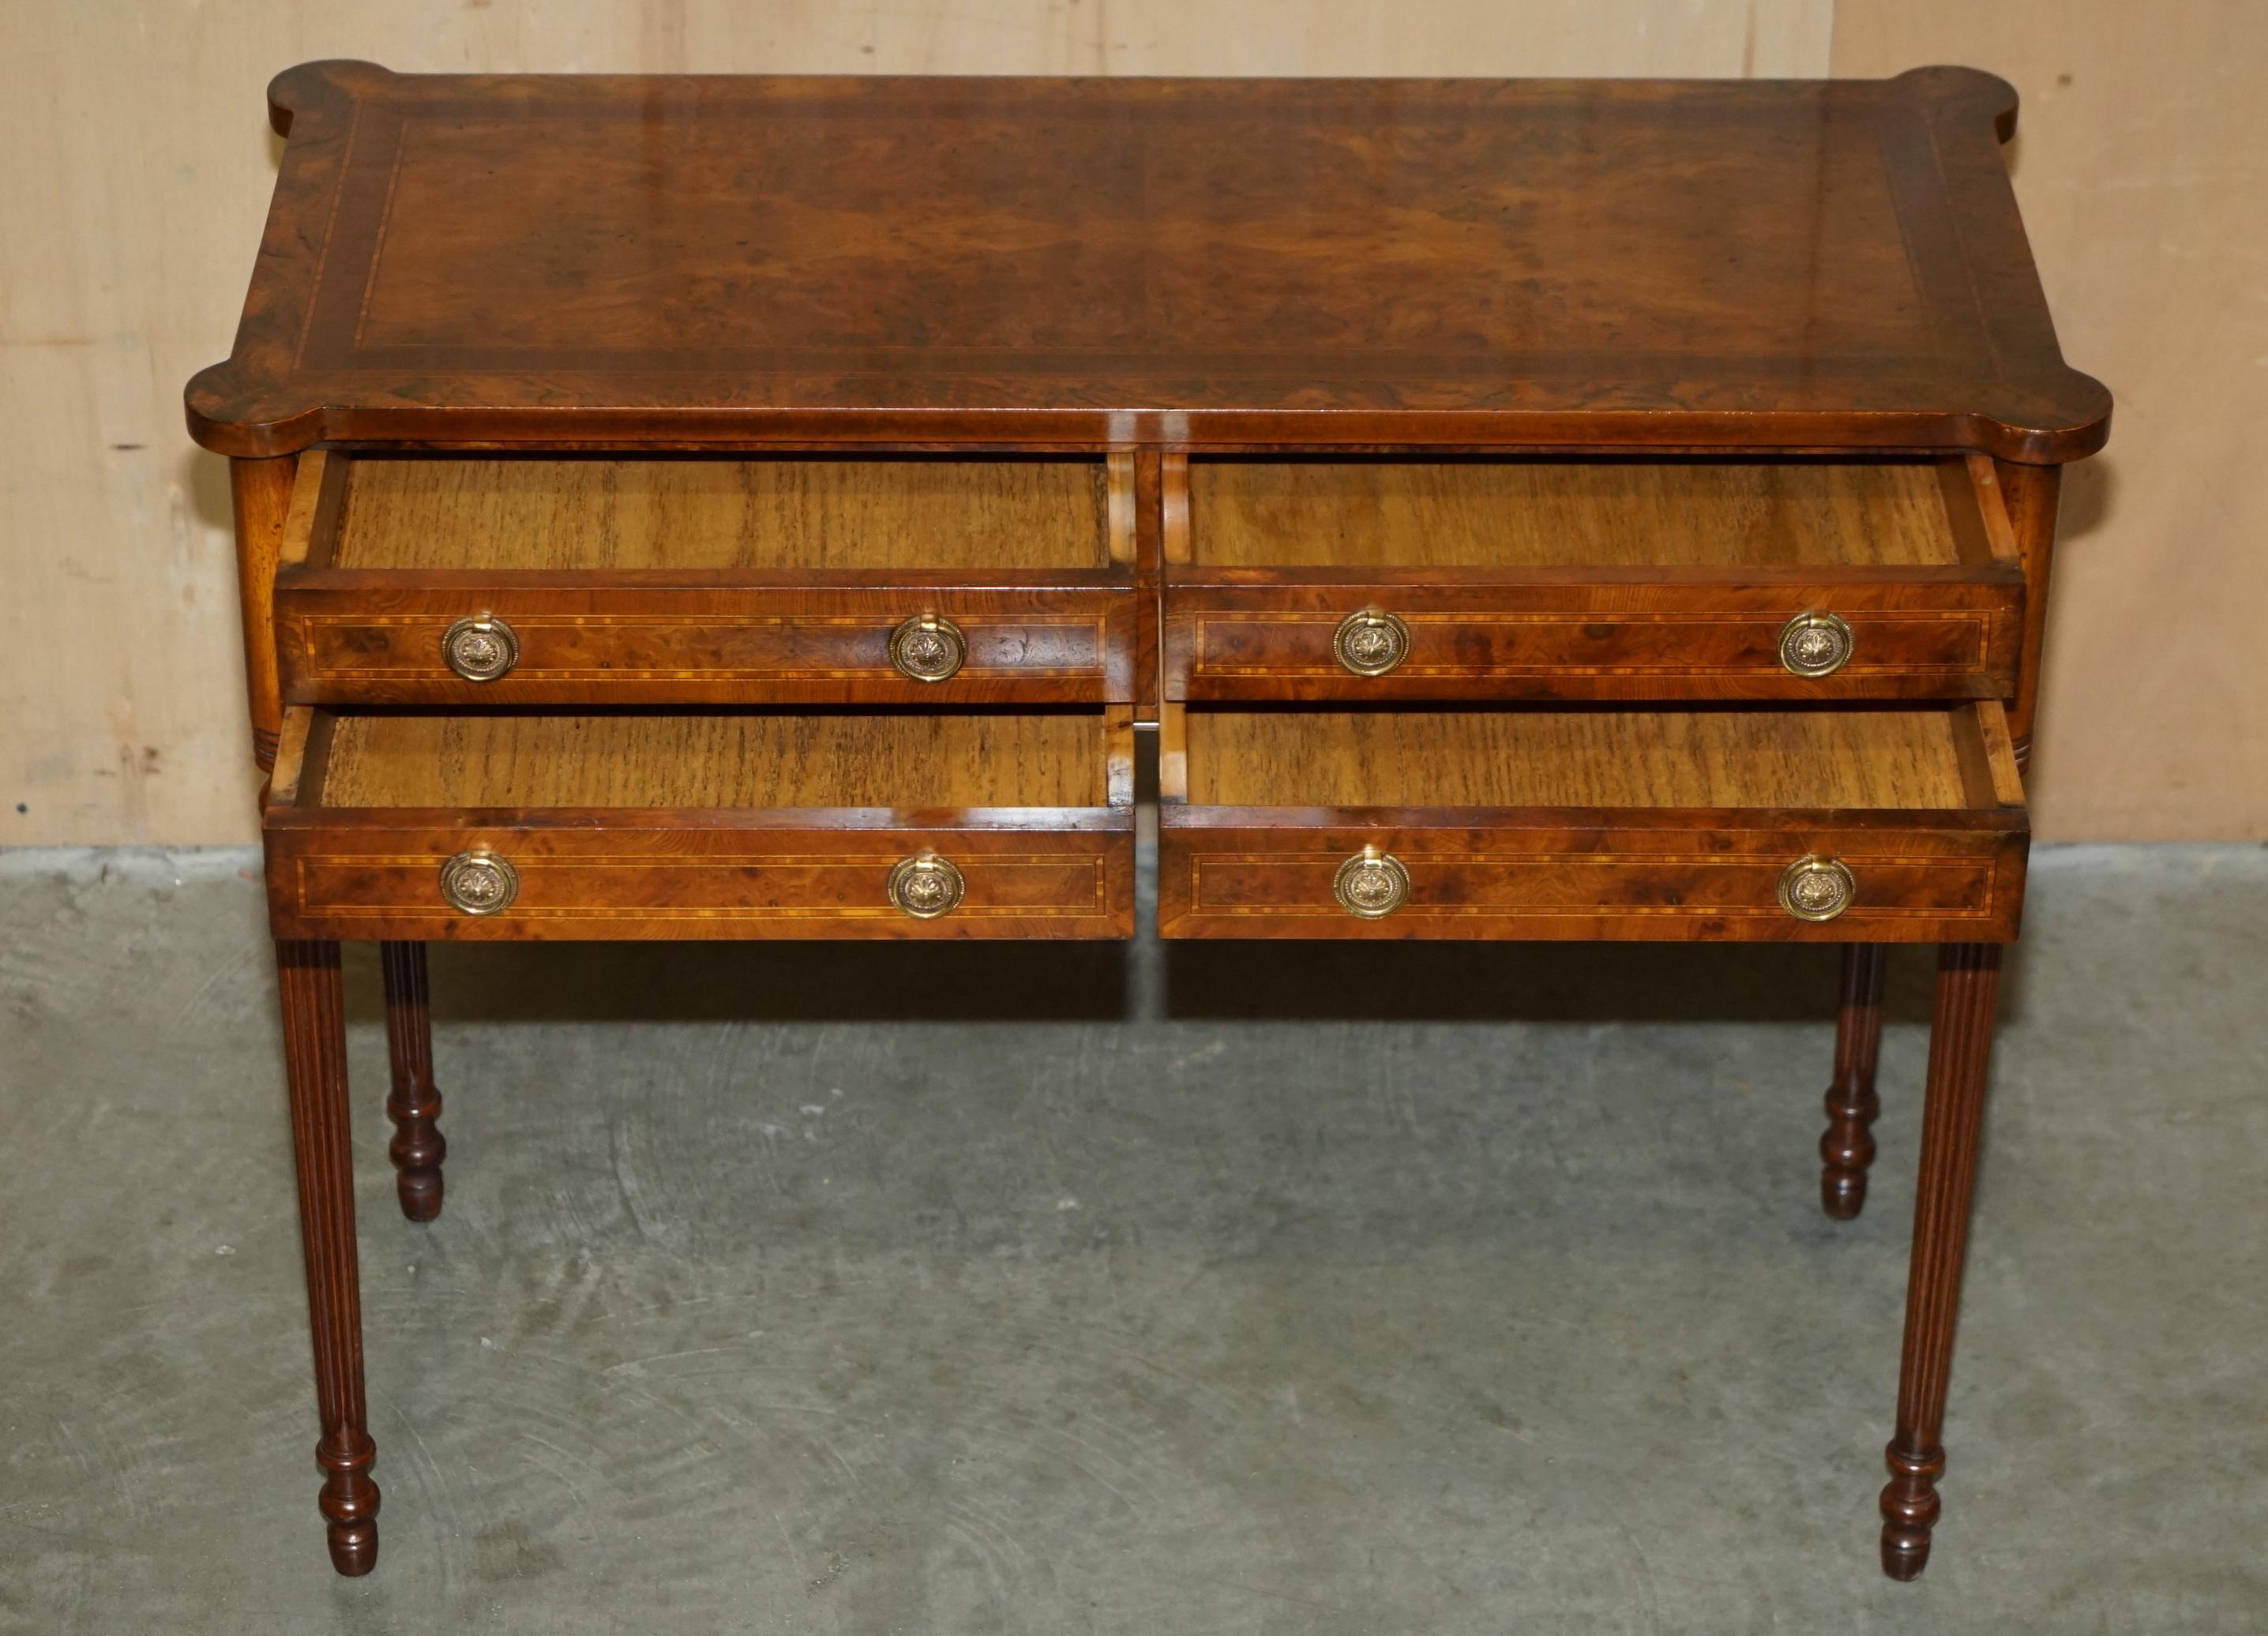 EXQUISITE CIRCA 1920 BURR ELM & SATiNWOOD FRENCH POLISHED RESTORED CONSOLE TABLE im Angebot 11